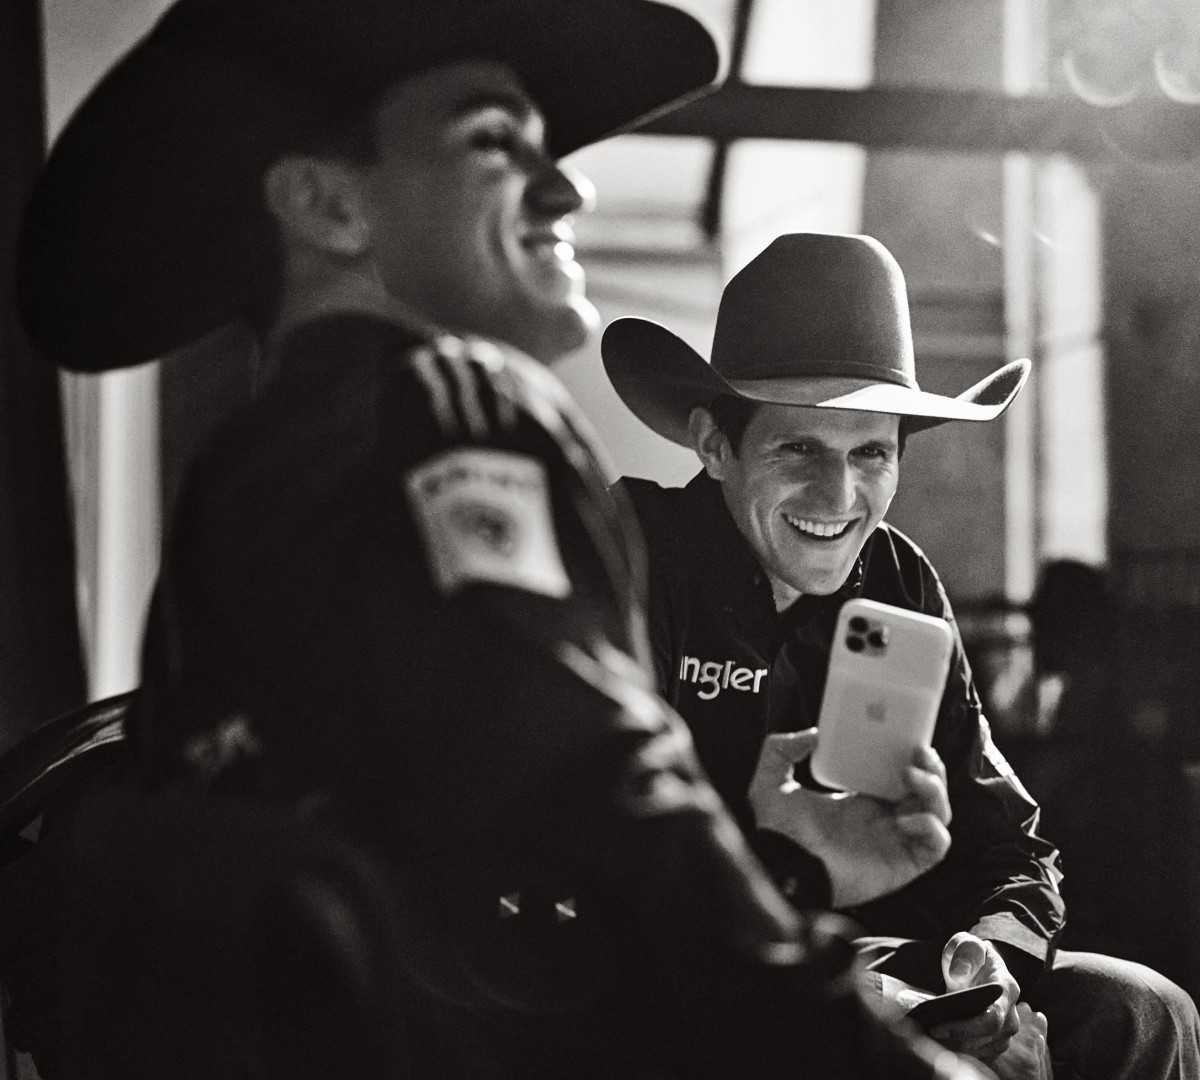 BEAUTIFUL GAMER
Jose Vitor Leme (with phone, and fellow rider Dener Barbosa), a former semipro soccer player in Brazil, was the 2020 PBR world champion.
